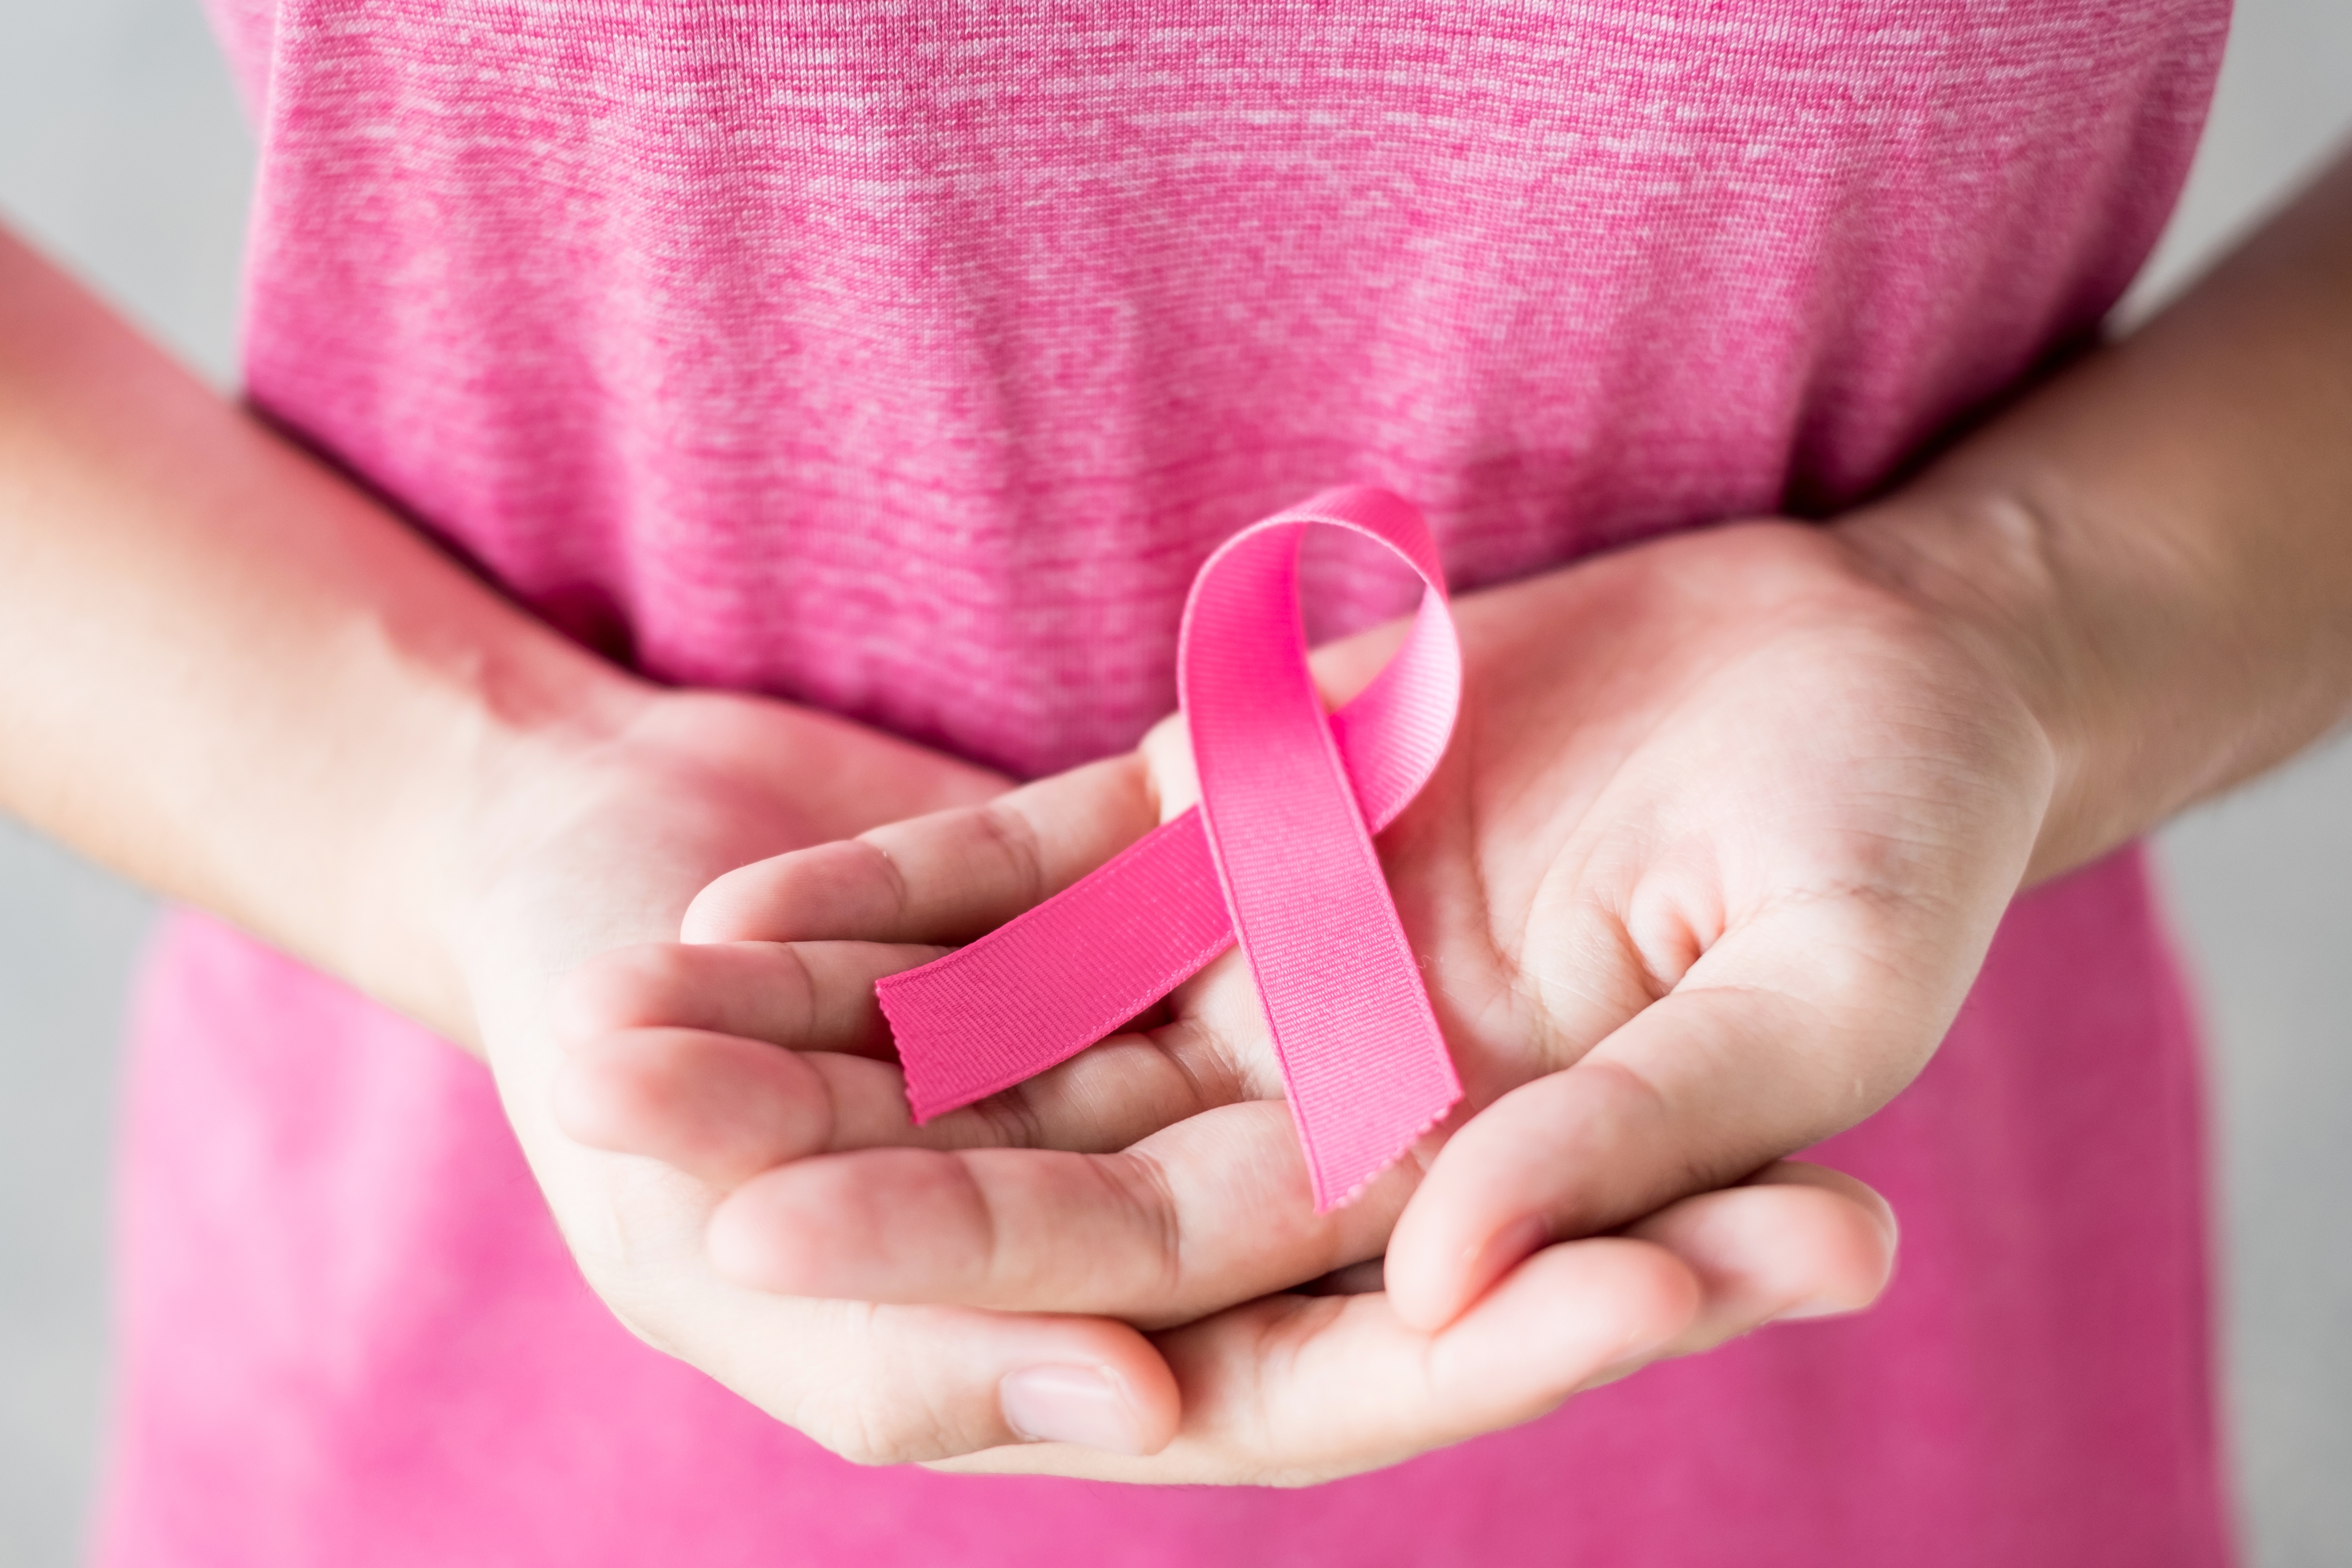 Are there foods that help prevent breast cancer?